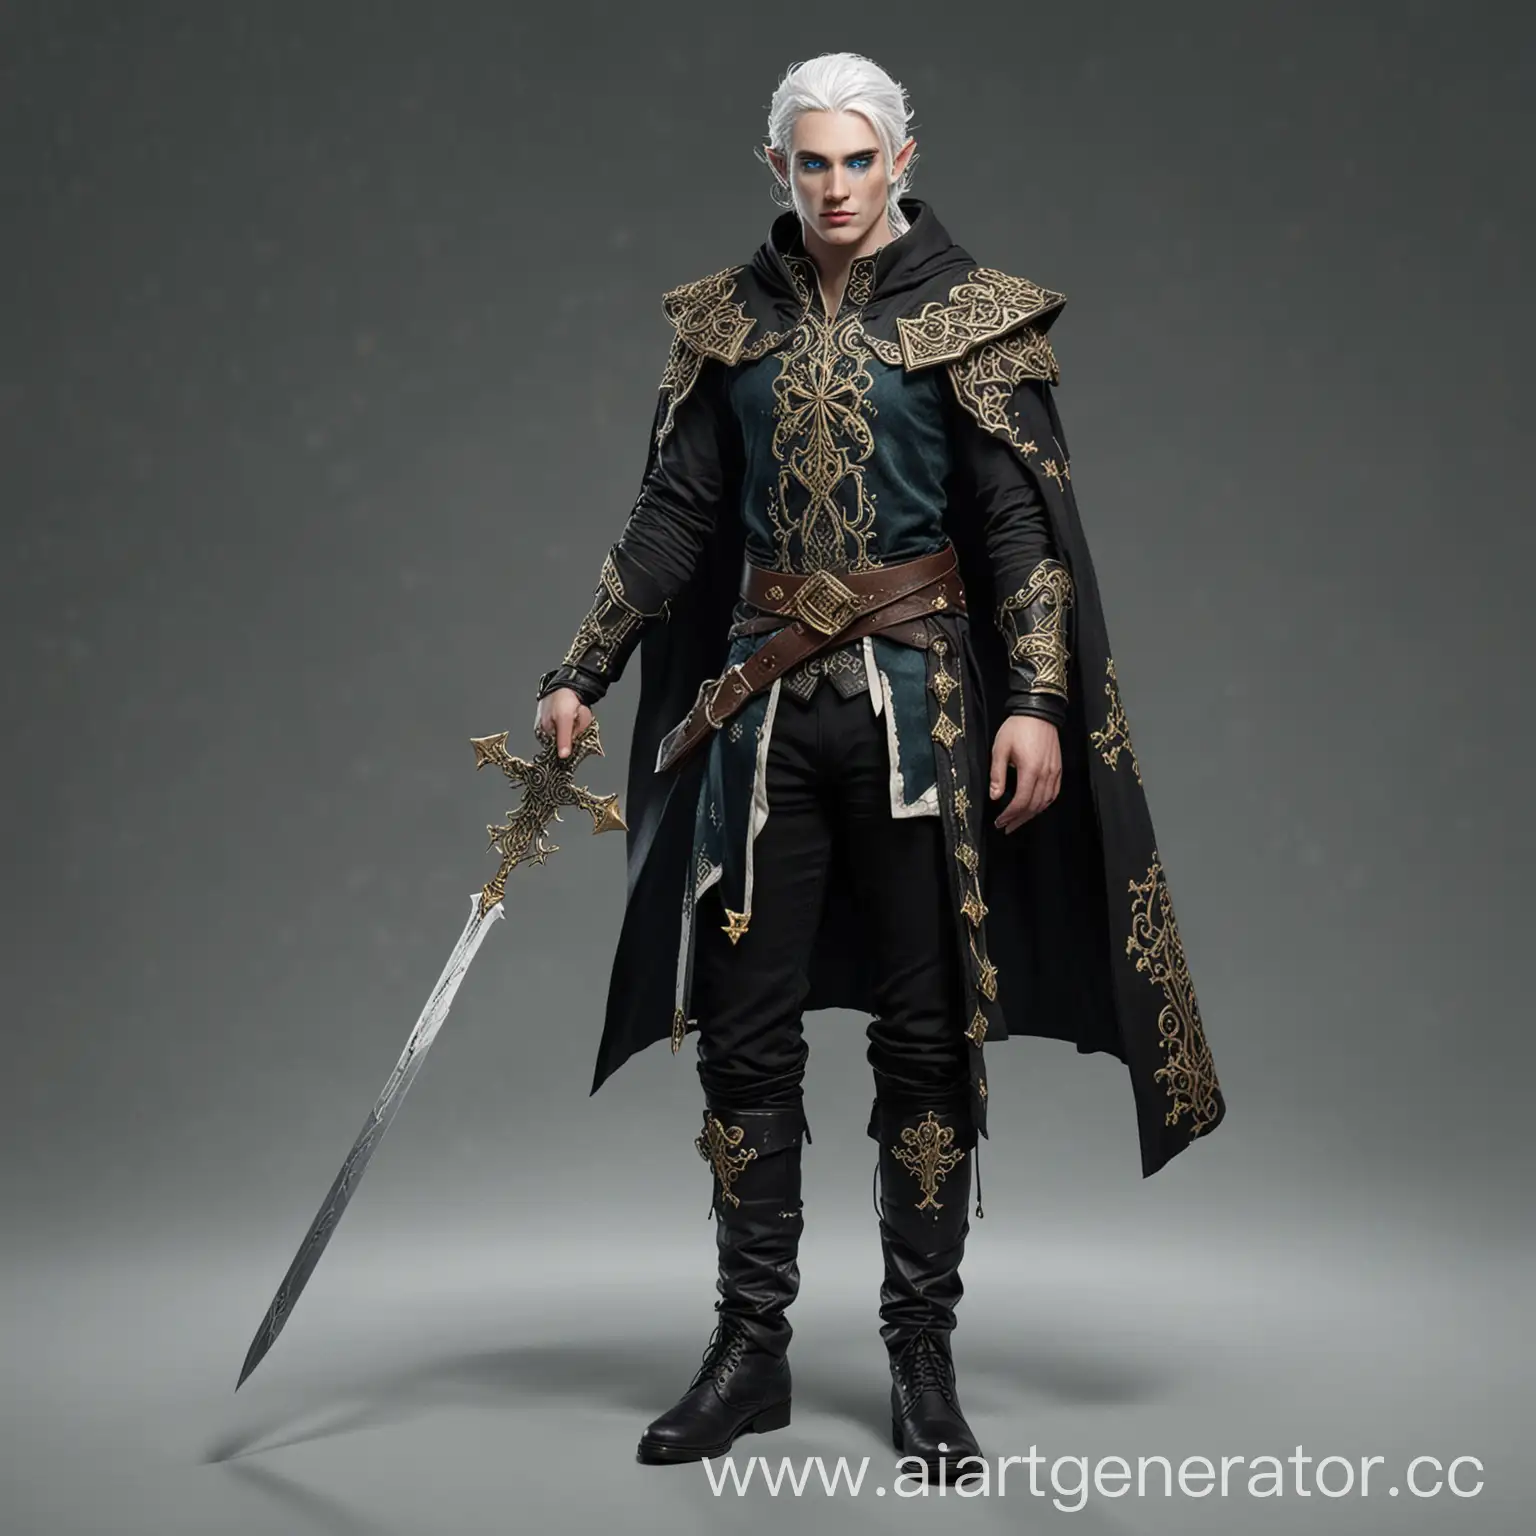 High-Elf-Warrior-with-Glowing-Crossed-Swords-and-Ornate-Cloak